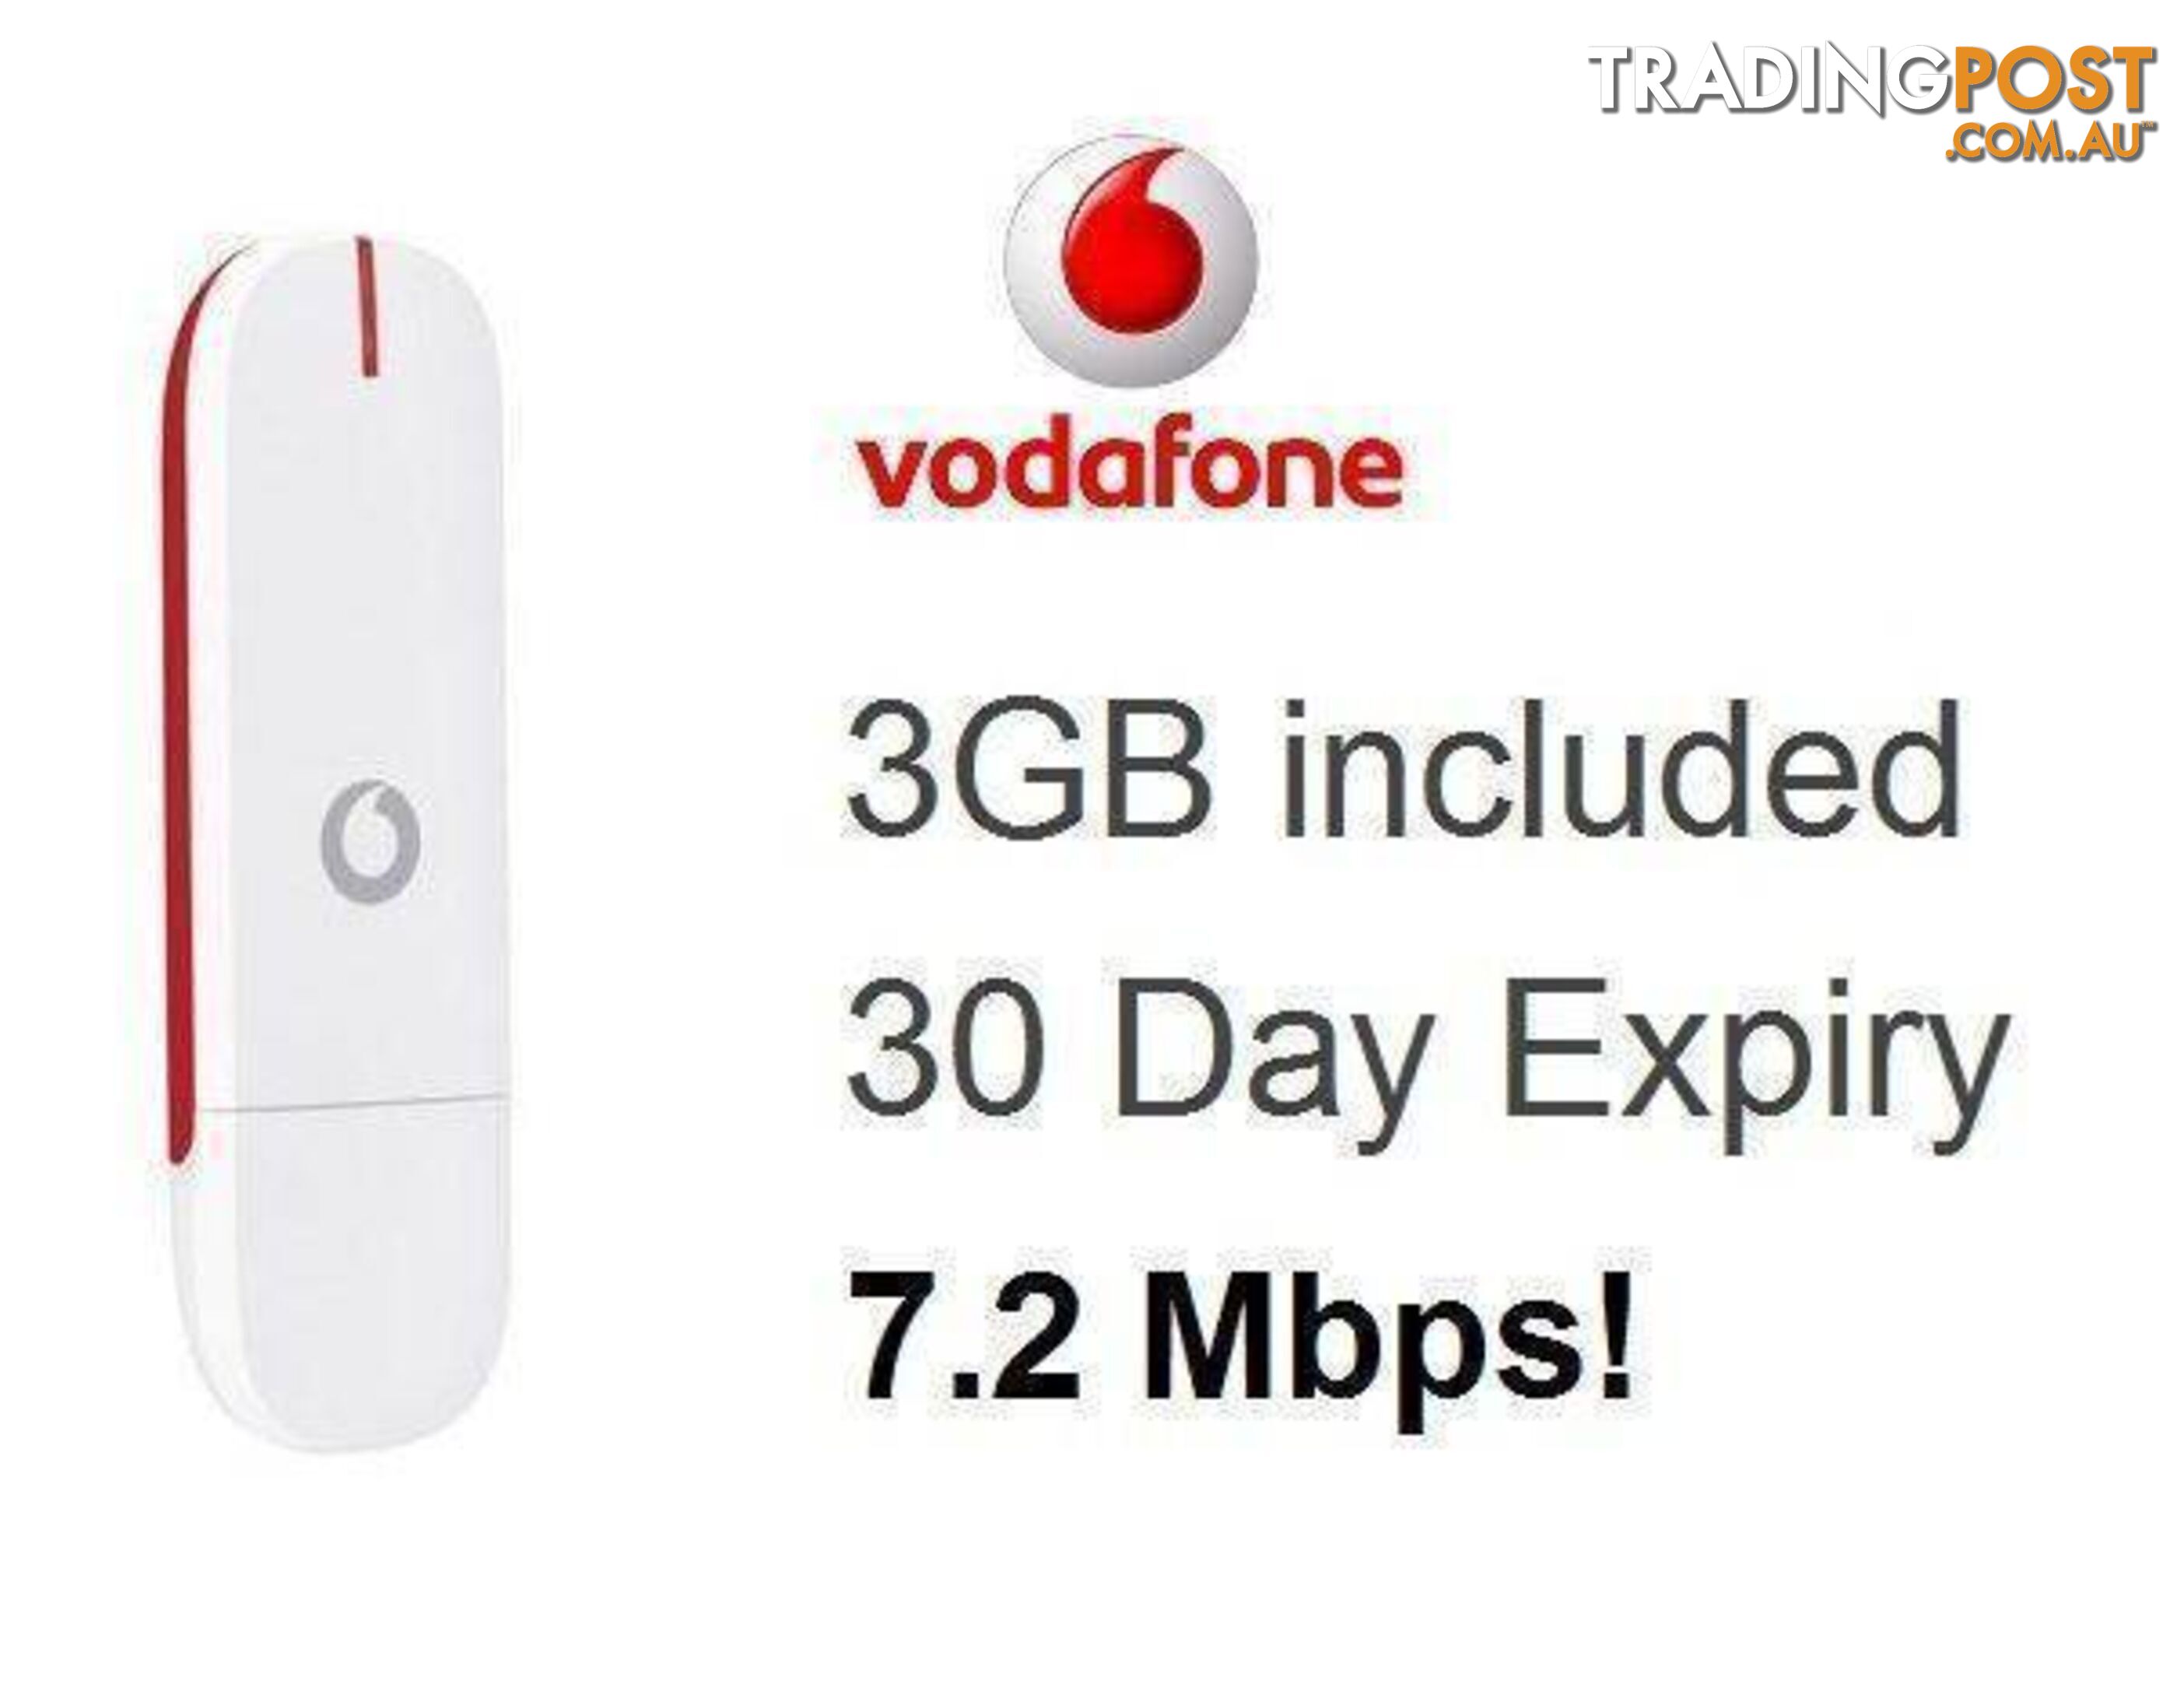 NEW Vodafone usb 3g modem COMES WITH SIM CARD AND 3GB OF DATA INC